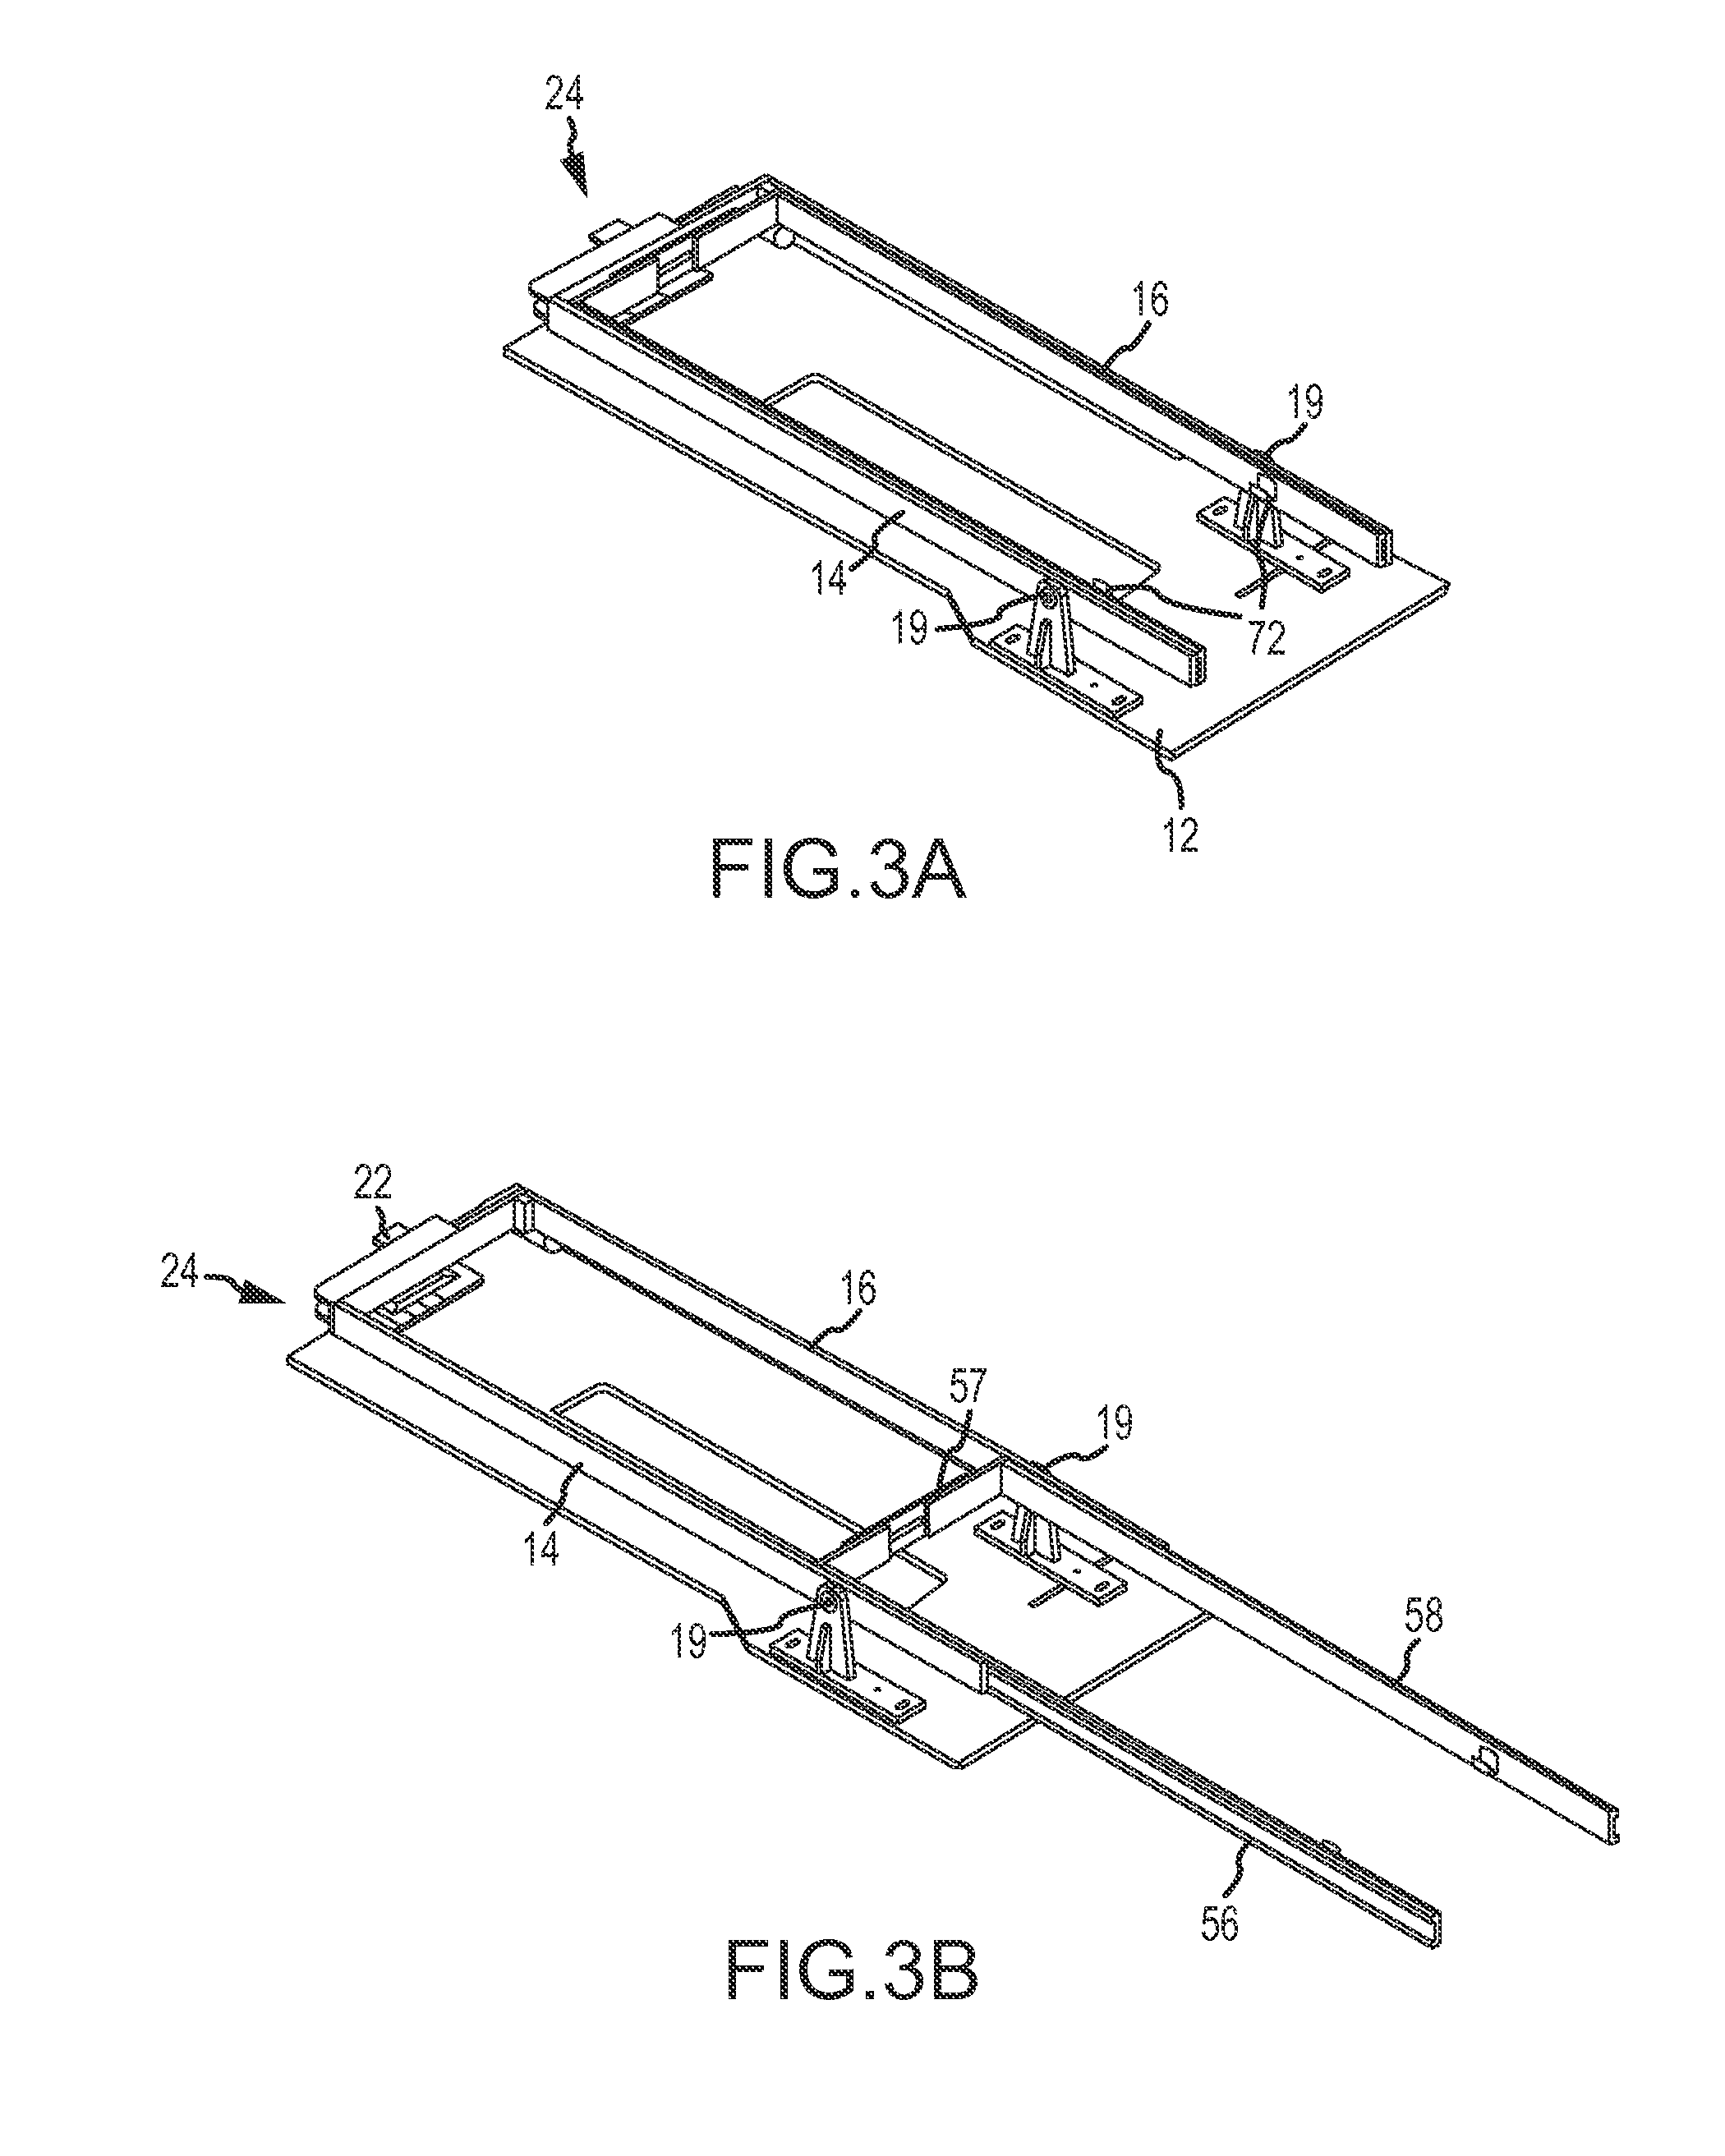 System and method for transferring a wheeled load into a transport vehicle